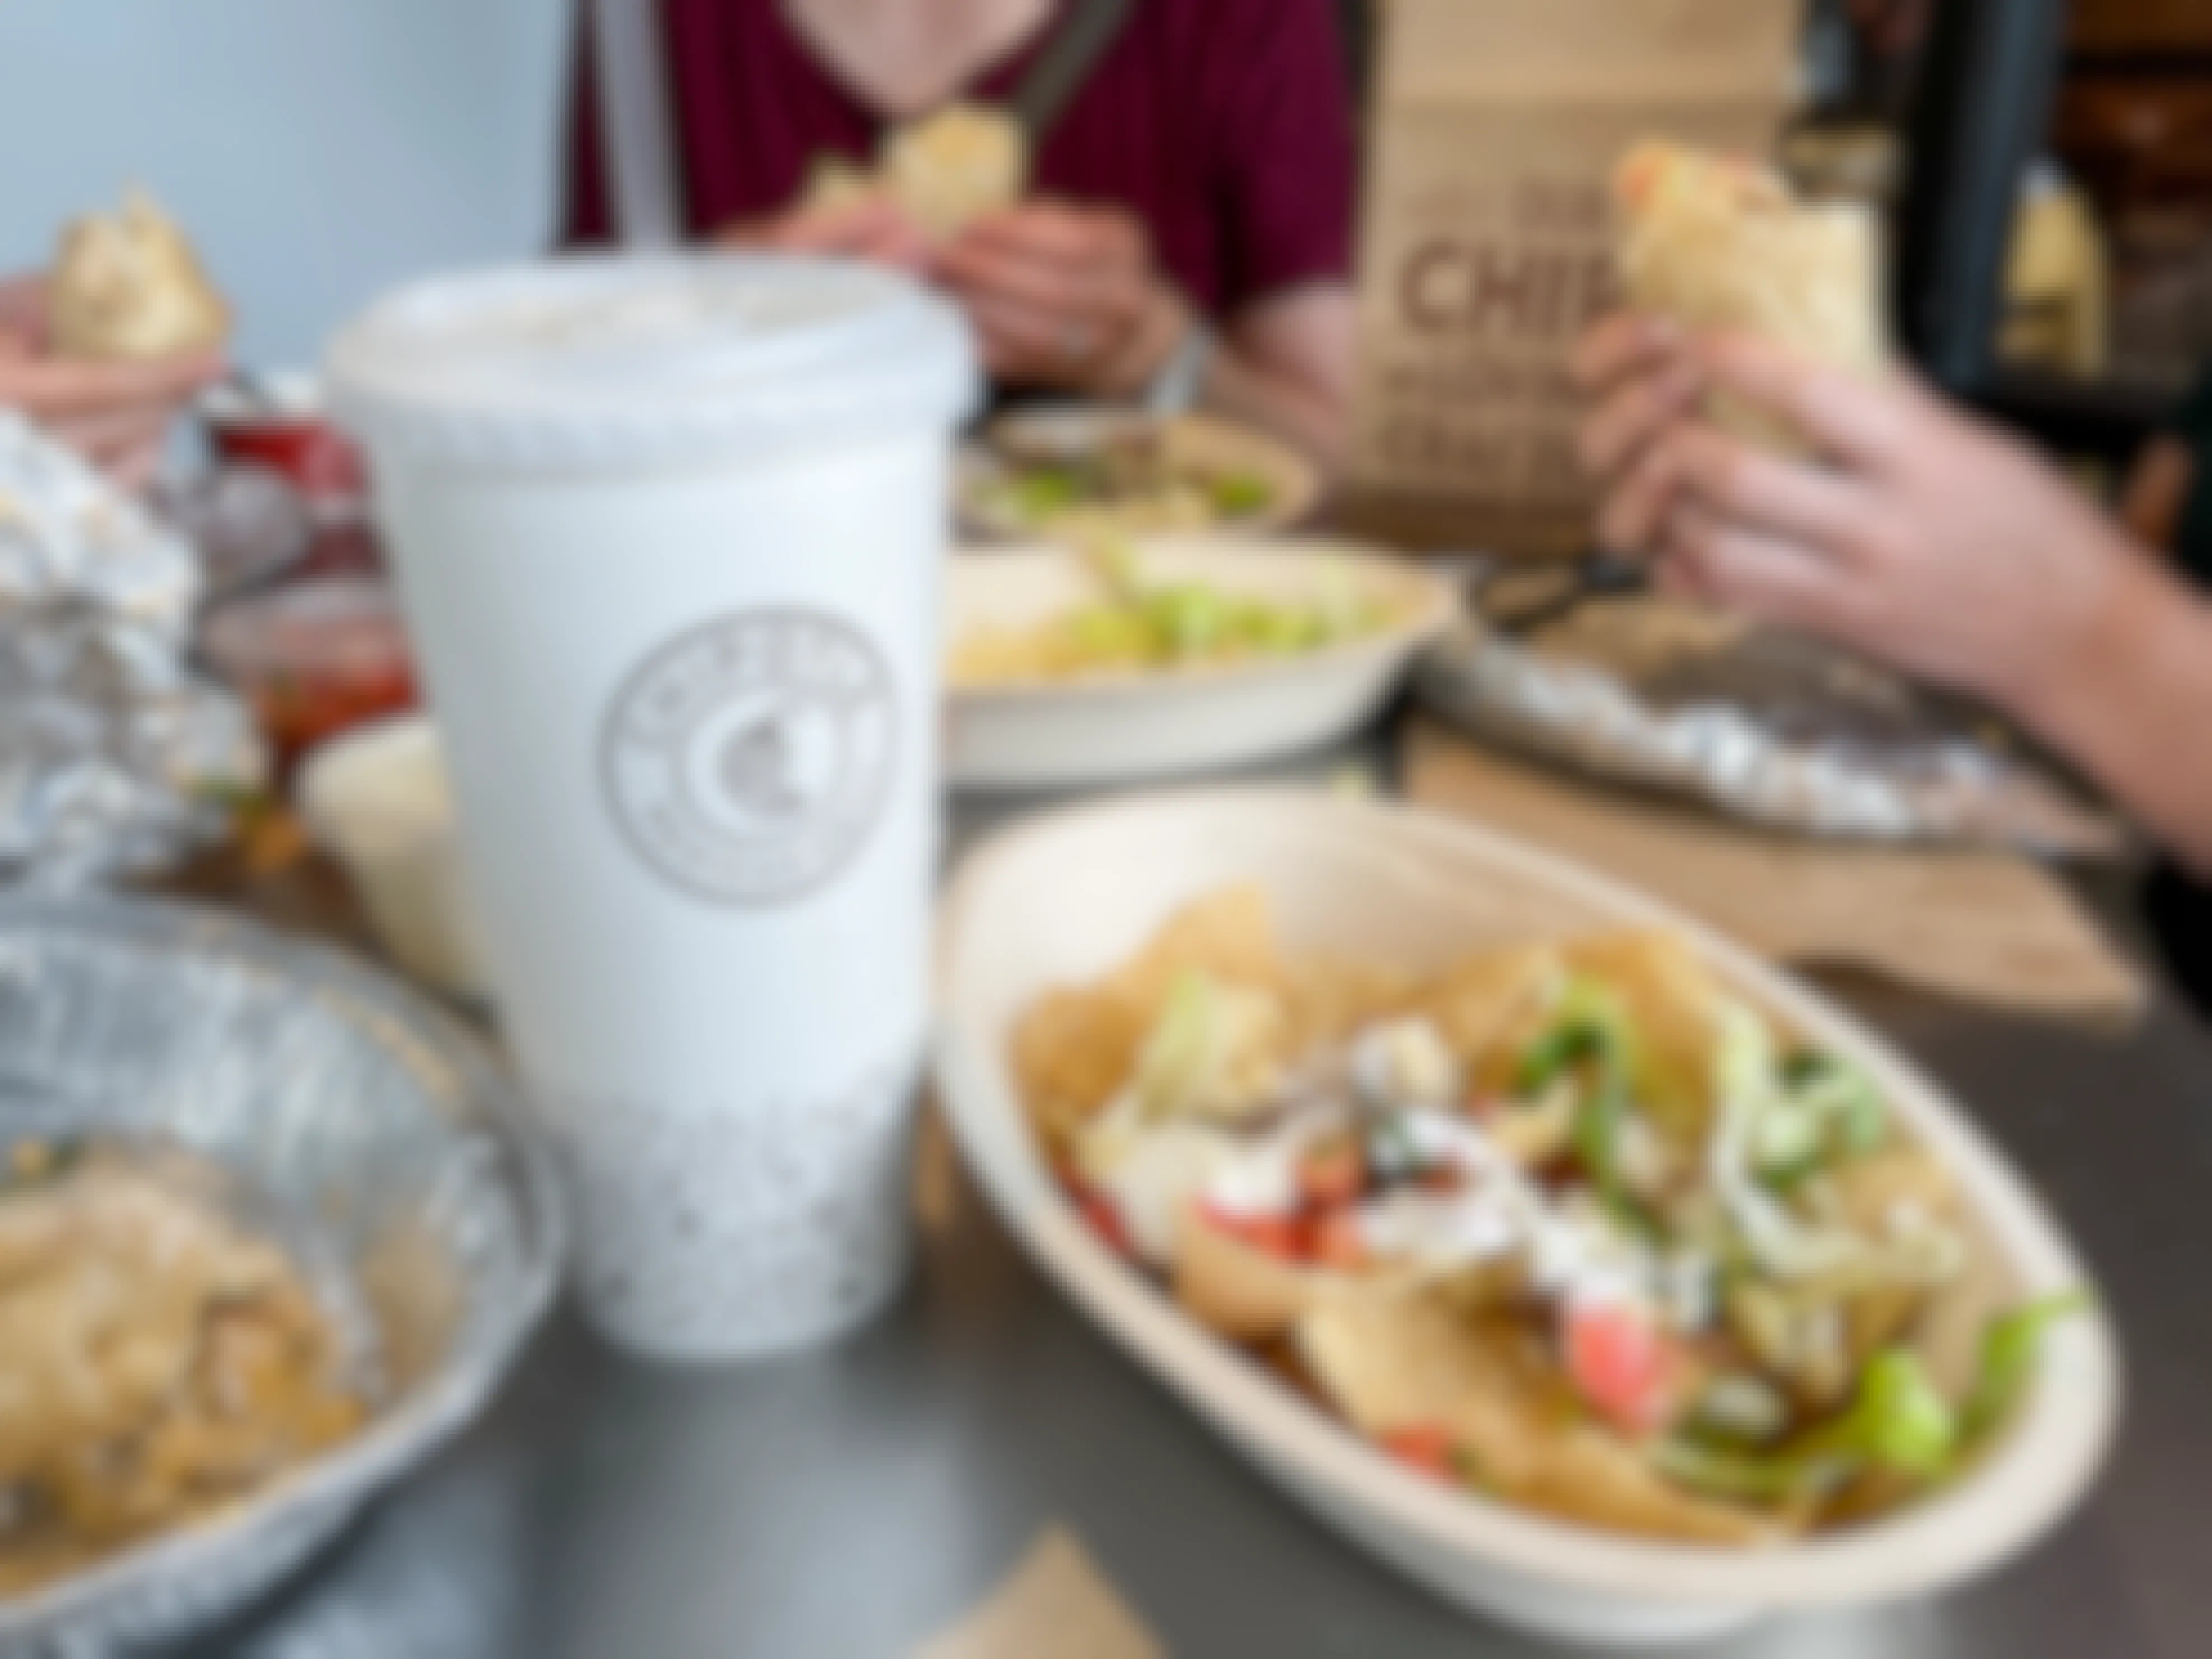 Three people holding burittos at a table filled with food. A drink cup is in the for front clearly displaying the Chipotle logo.